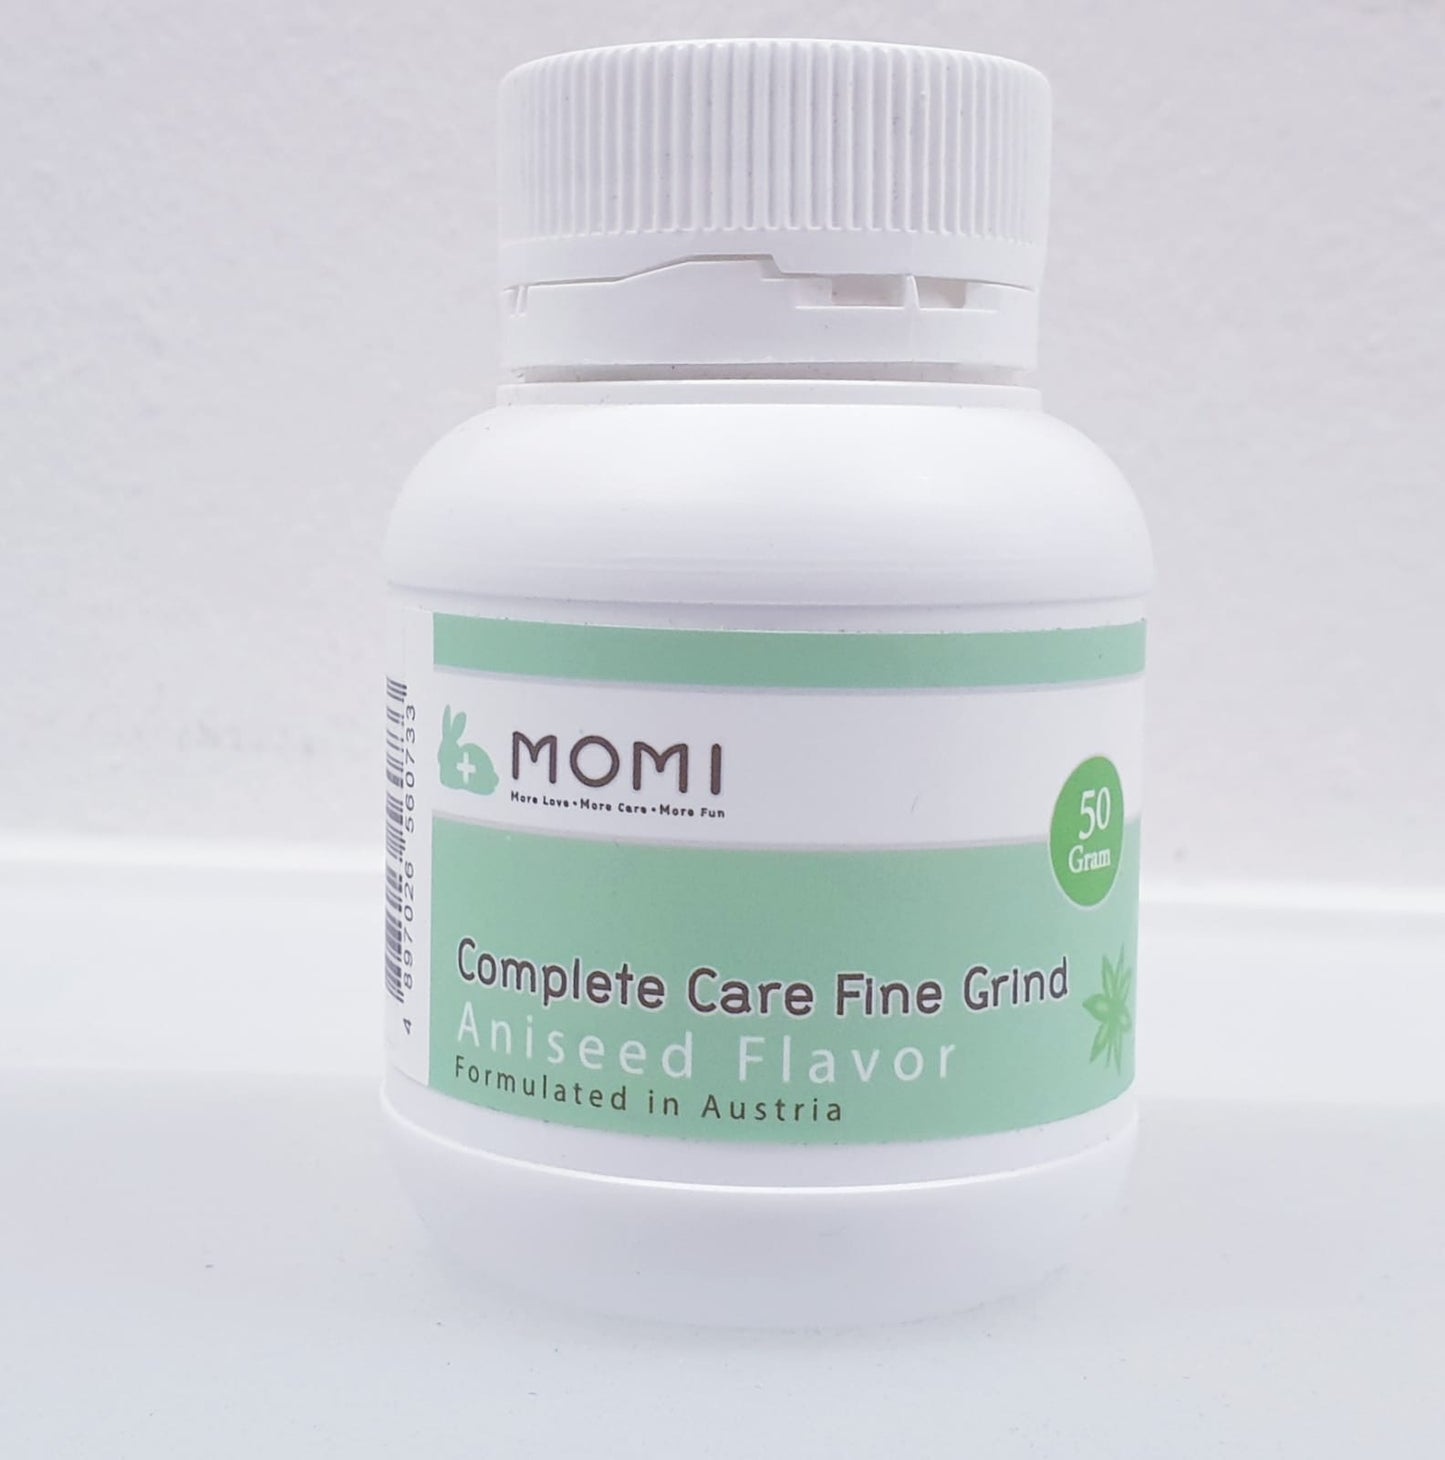 Momi Complete Care Fine Grind - Aniseed Flavor